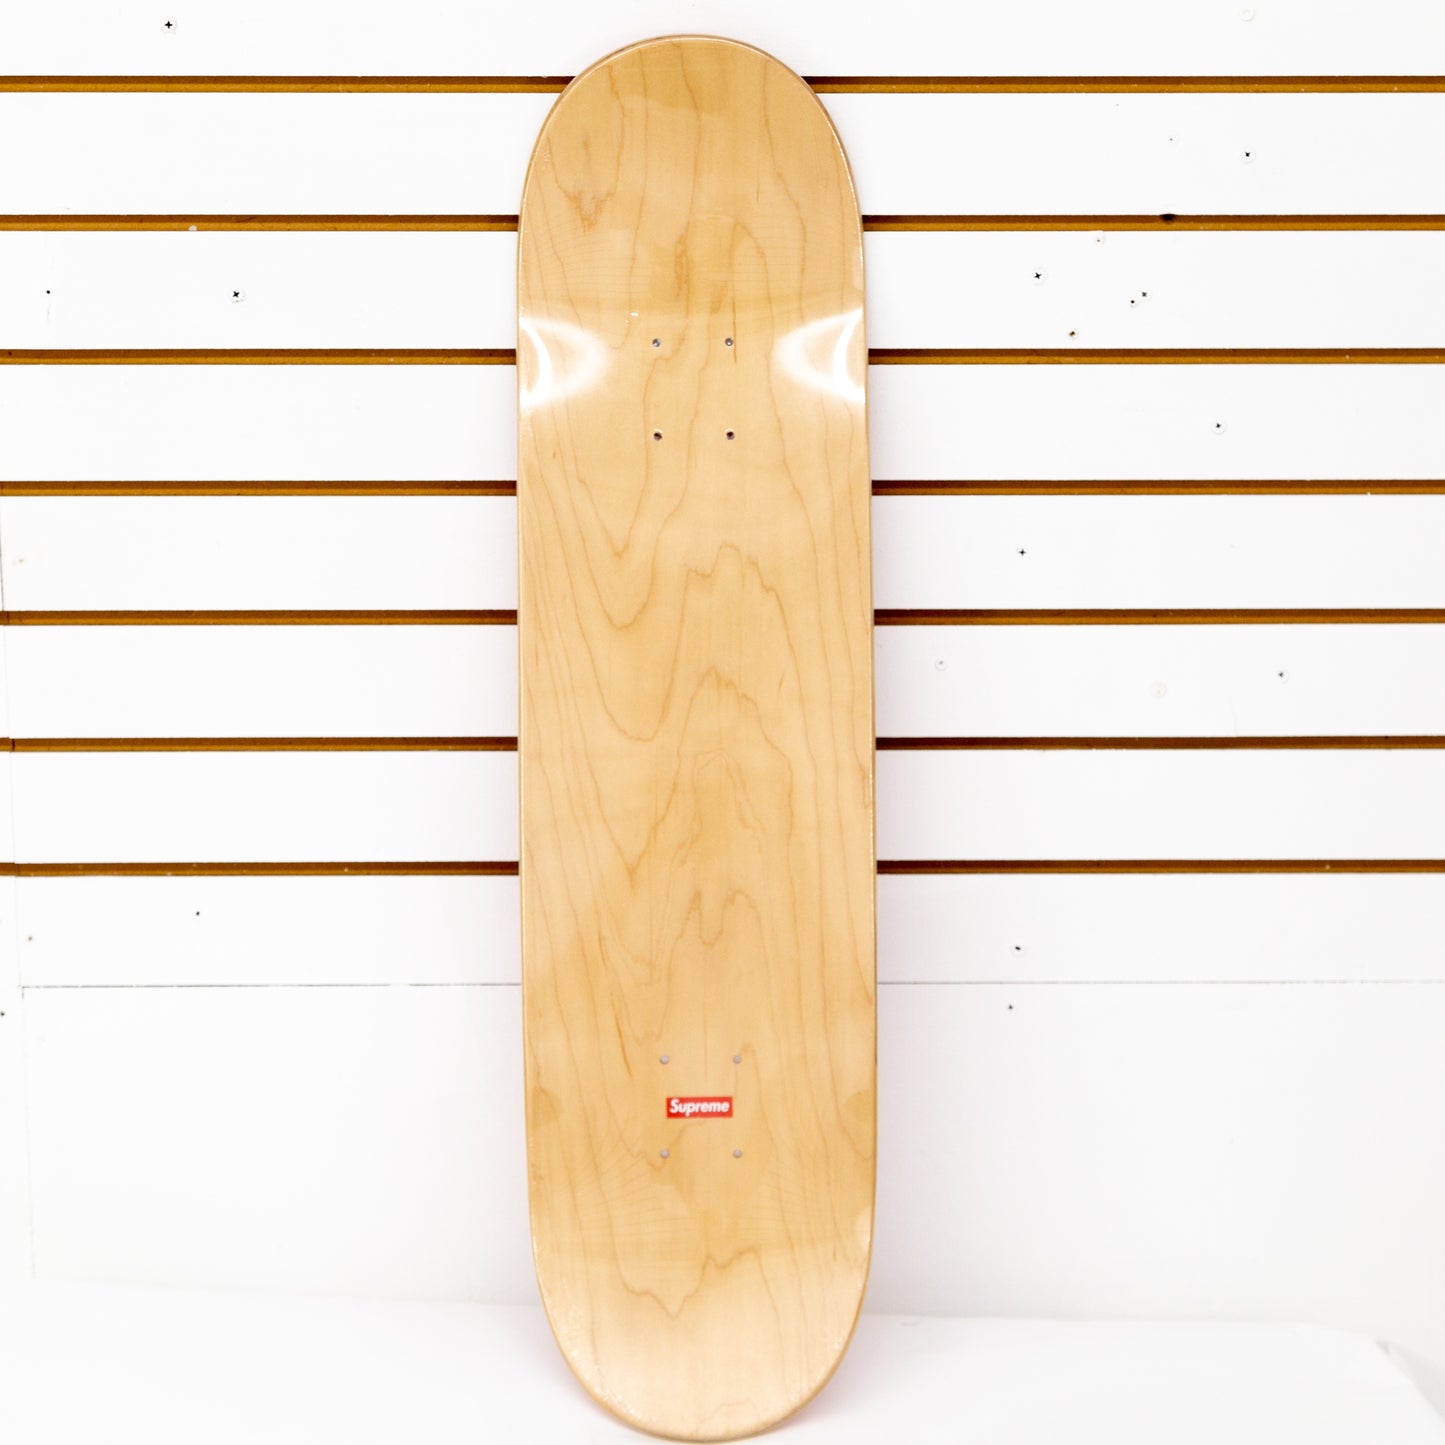 Supreme x Kaws Chum Deck (Red) (Accepting offers)